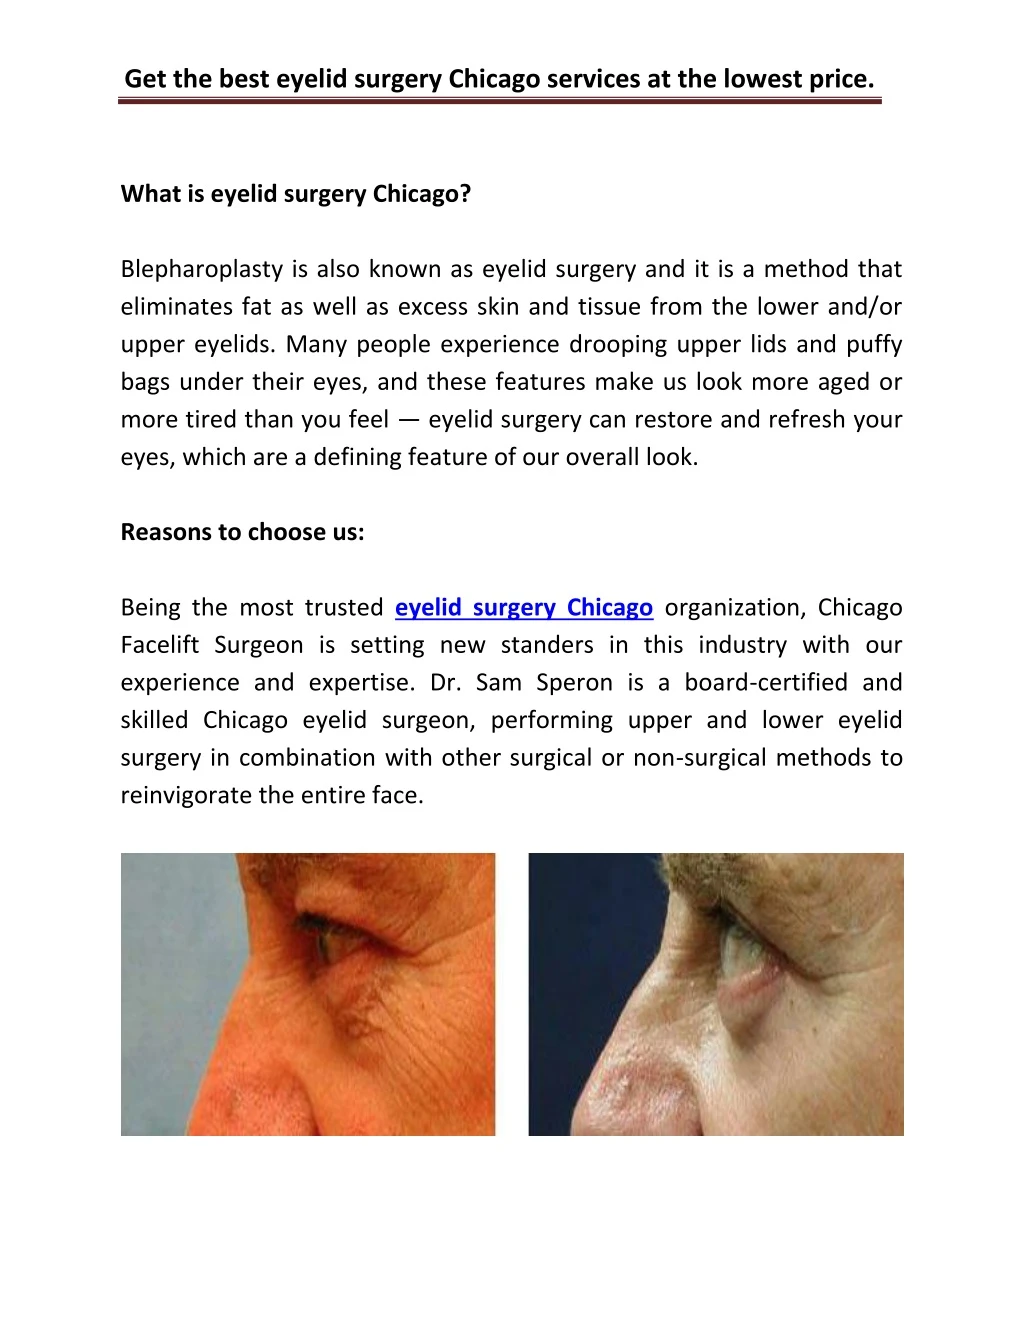 get the best eyelid surgery chicago services